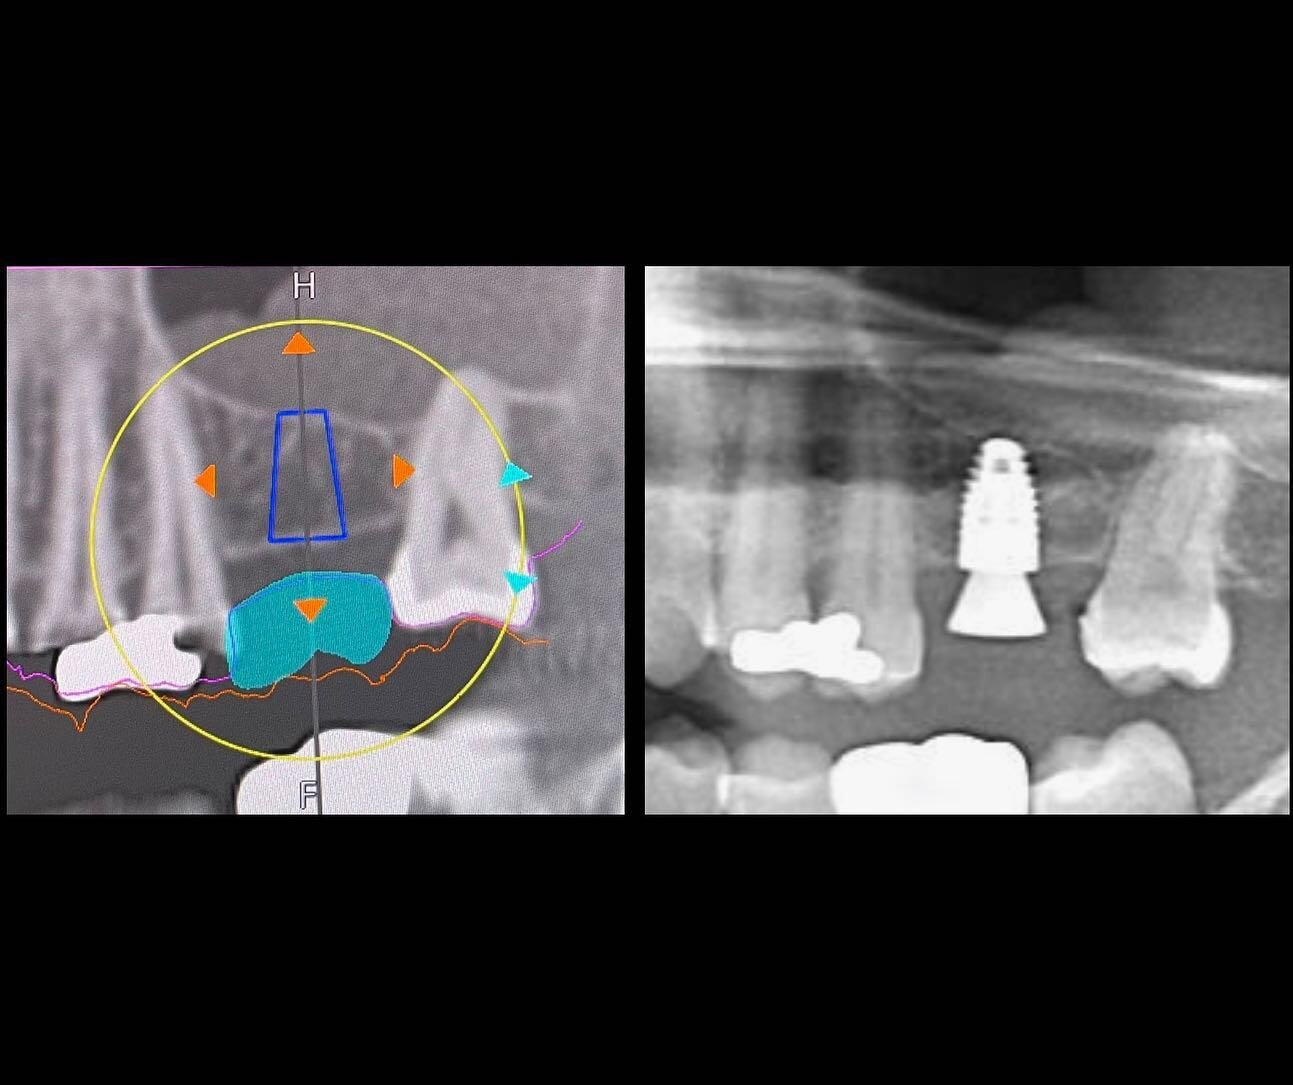 Planning with the end in mind gives best results.

This post shows virtual planning and final result of an implant to replace a maxillary first molar.

Software and guided surgery to help plan and execute treatment. 

A digital impression is taken as